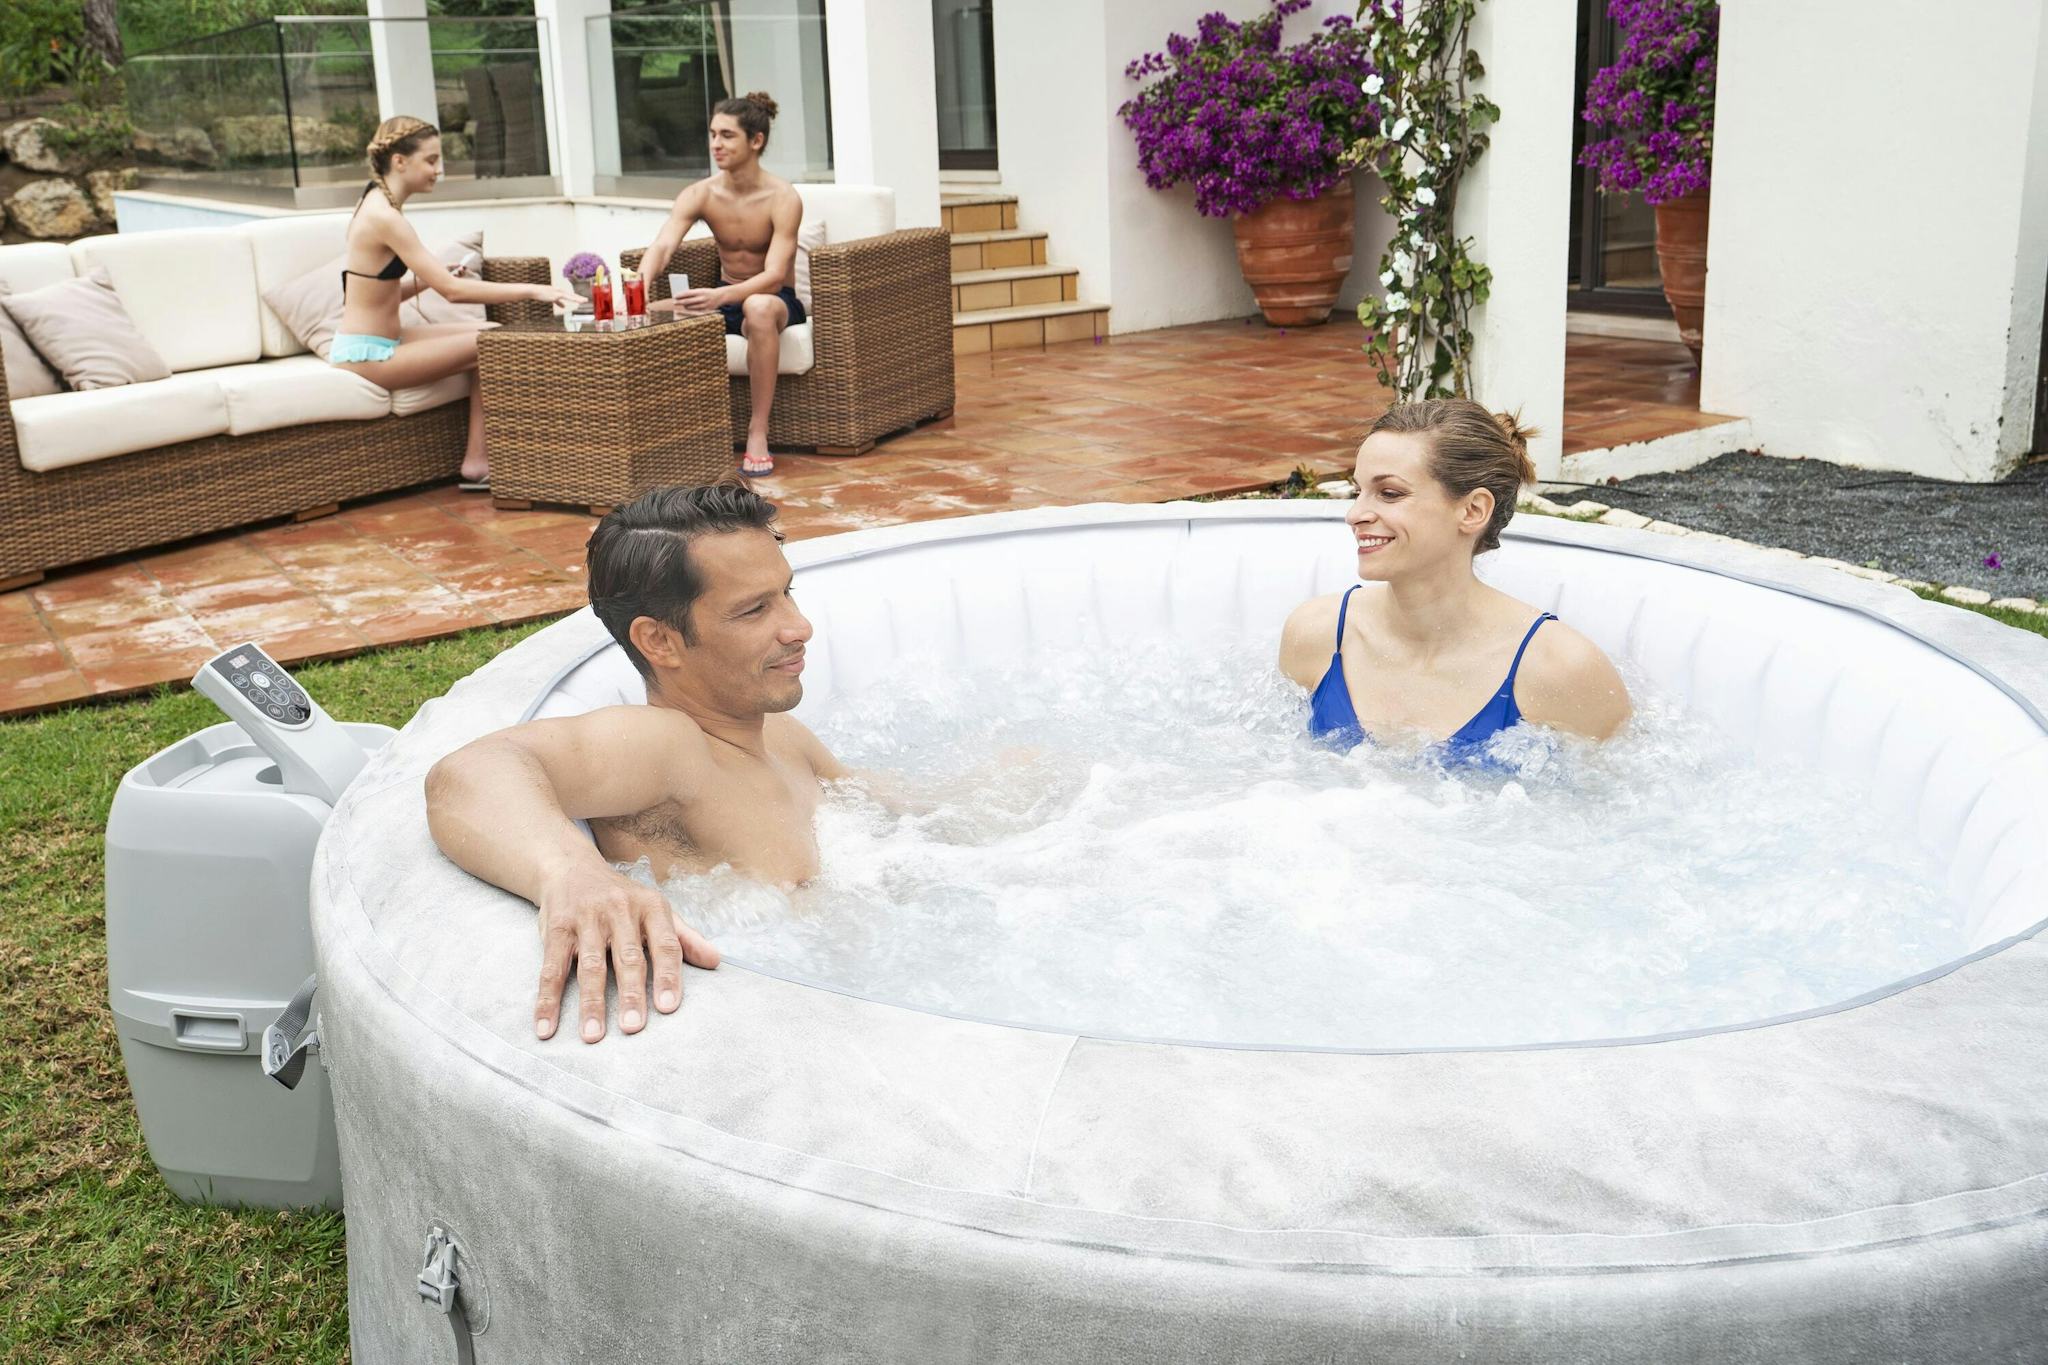 Spas Gonflables Spa gonflable rond Lay-Z-Spa Zurich Airjet™ 2 - 4 personnes Bestway 5